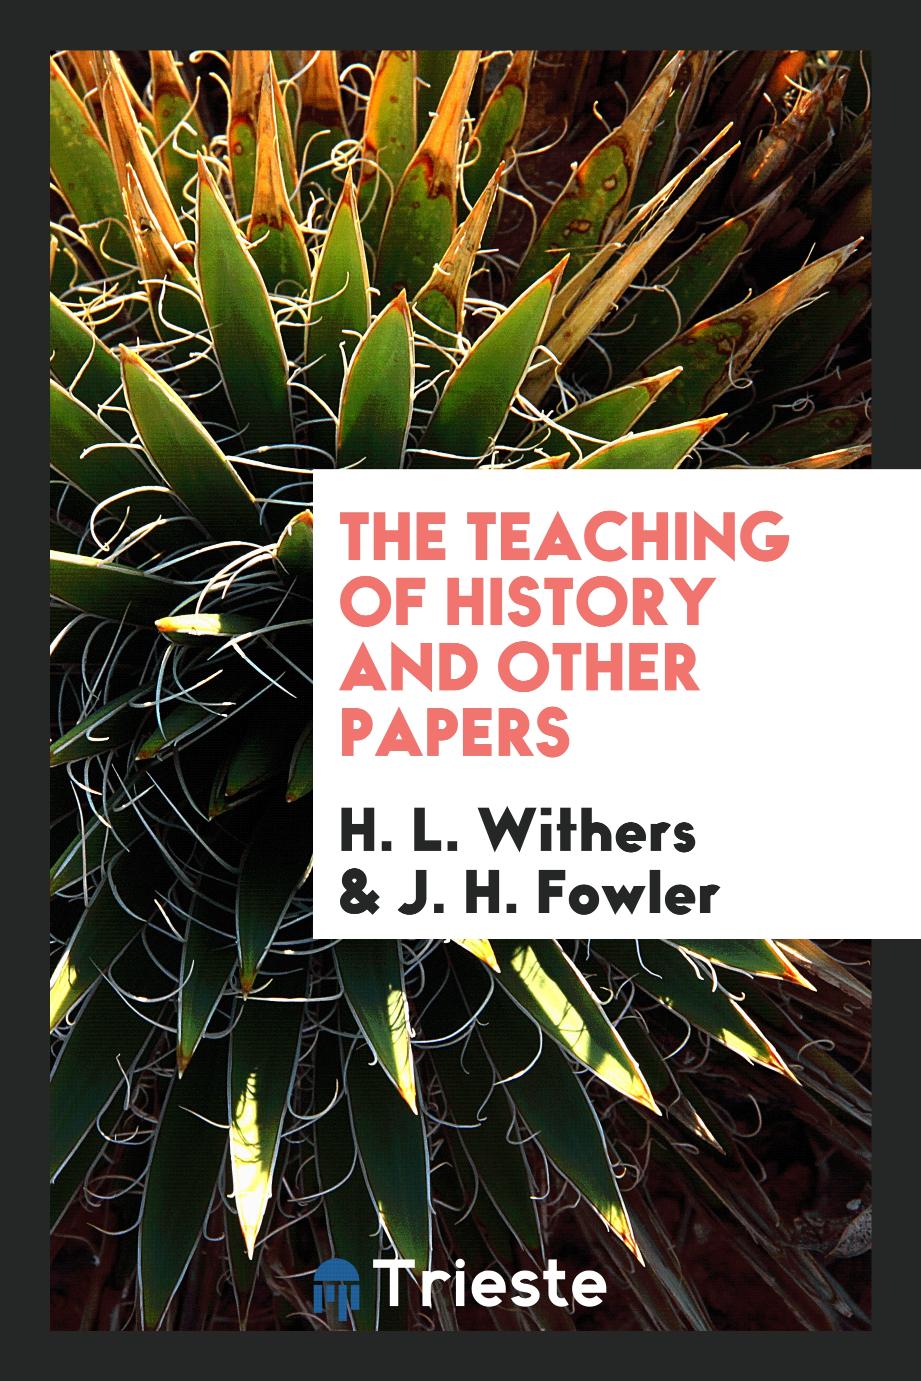 The teaching of history and other papers